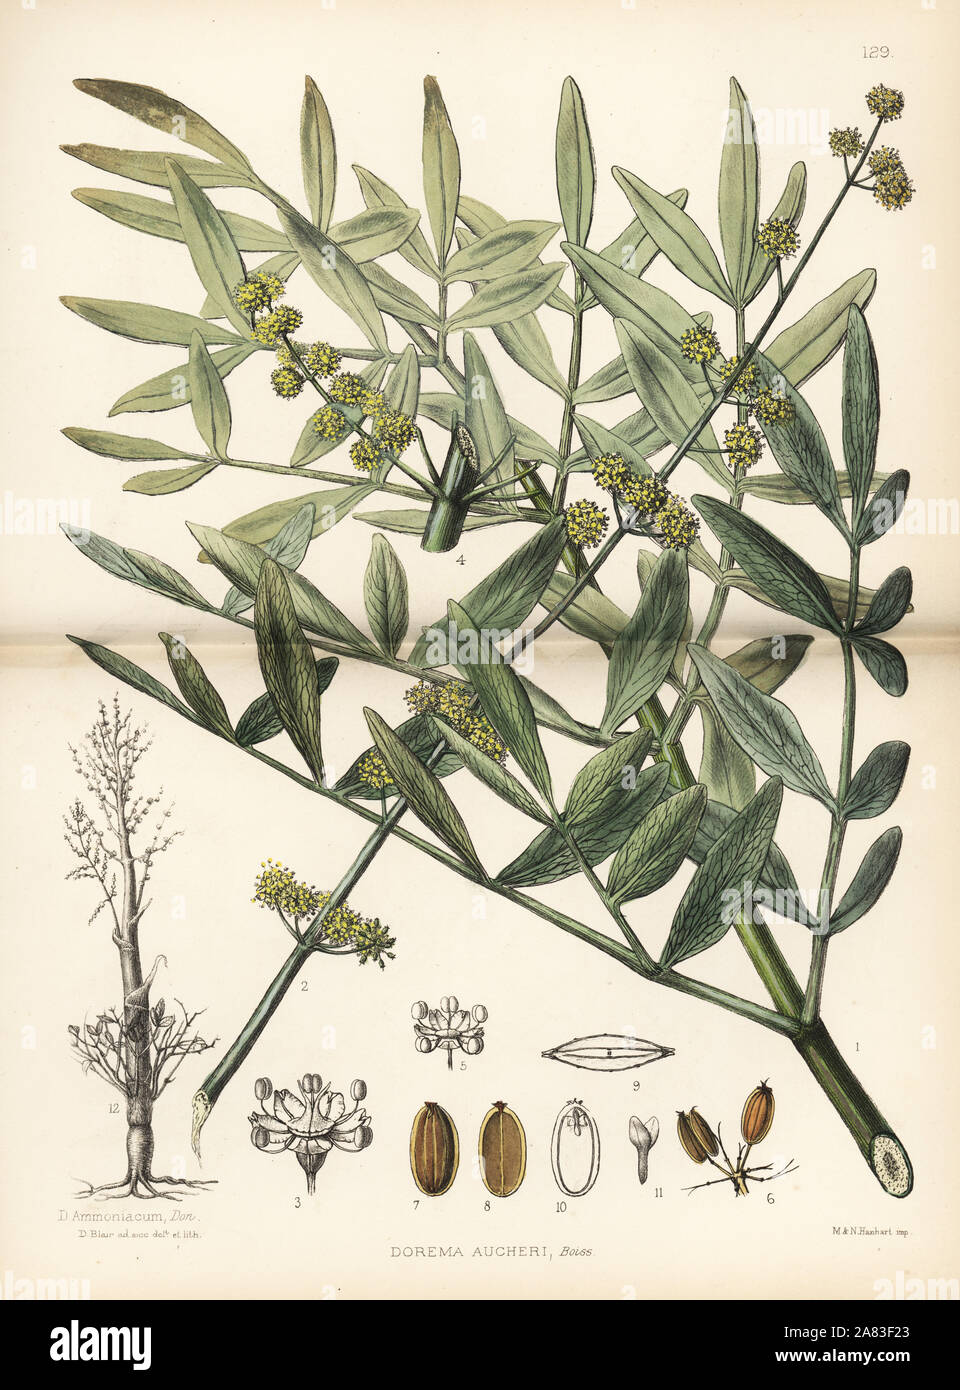 Zuh, weshek or bilhar, Dorema aucheri, and ammoniacum or gum ammoniac tree, Dorema ammoniacum. Handcoloured lithograph by Hanhart after a botanical illustration by David Blair from Robert Bentley and Henry Trimen's Medicinal Plants, London, 1880. Stock Photo